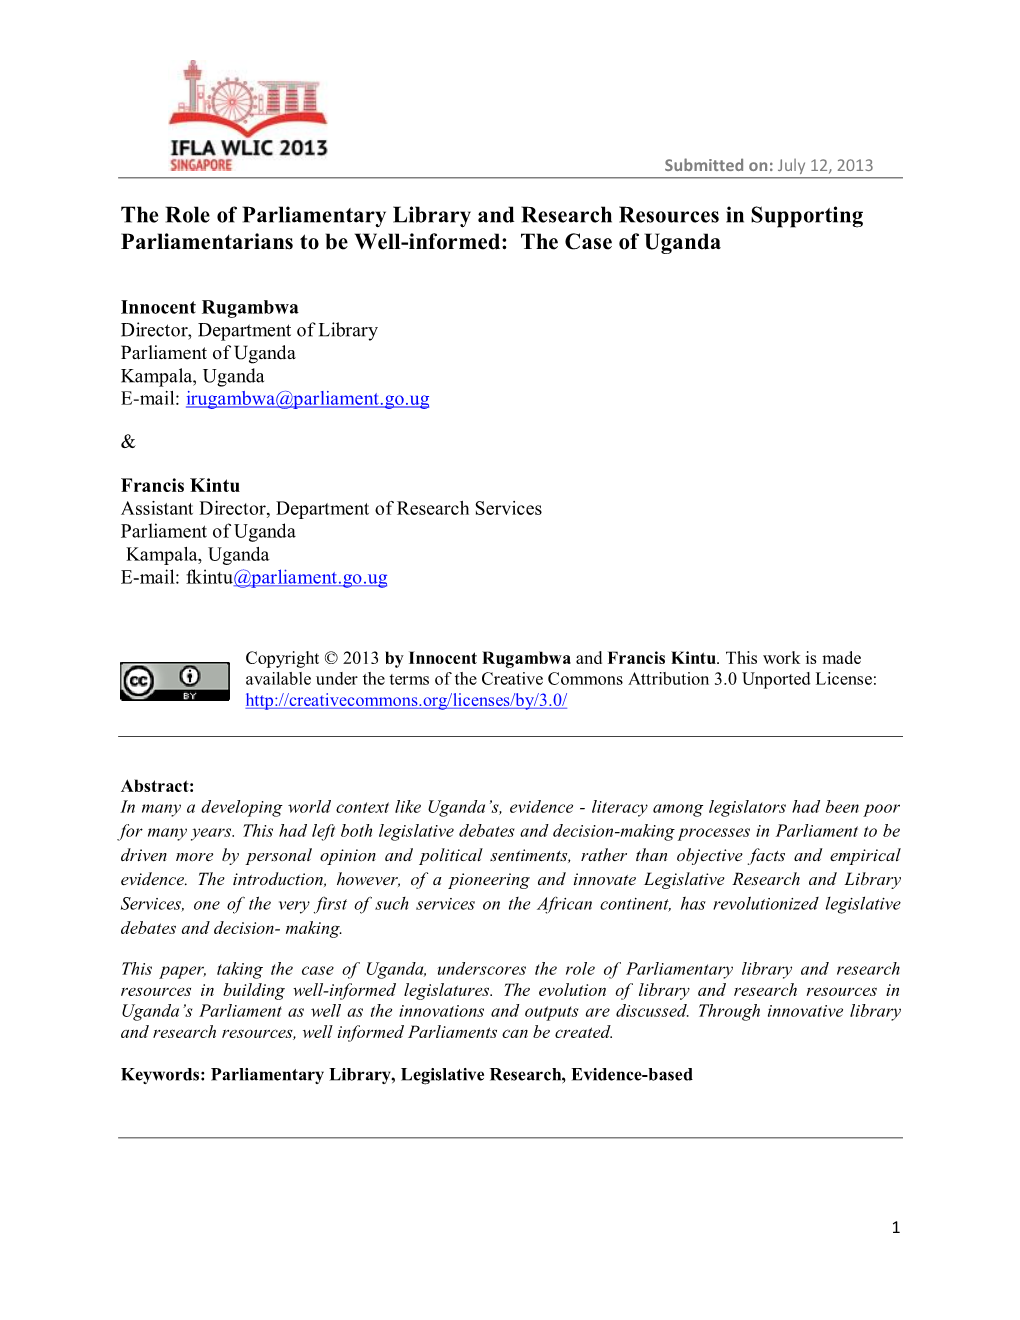 The Role of Parliamentary Library and Research Resources in Supporting Parliamentarians to Be Well-Informed: the Case of Uganda